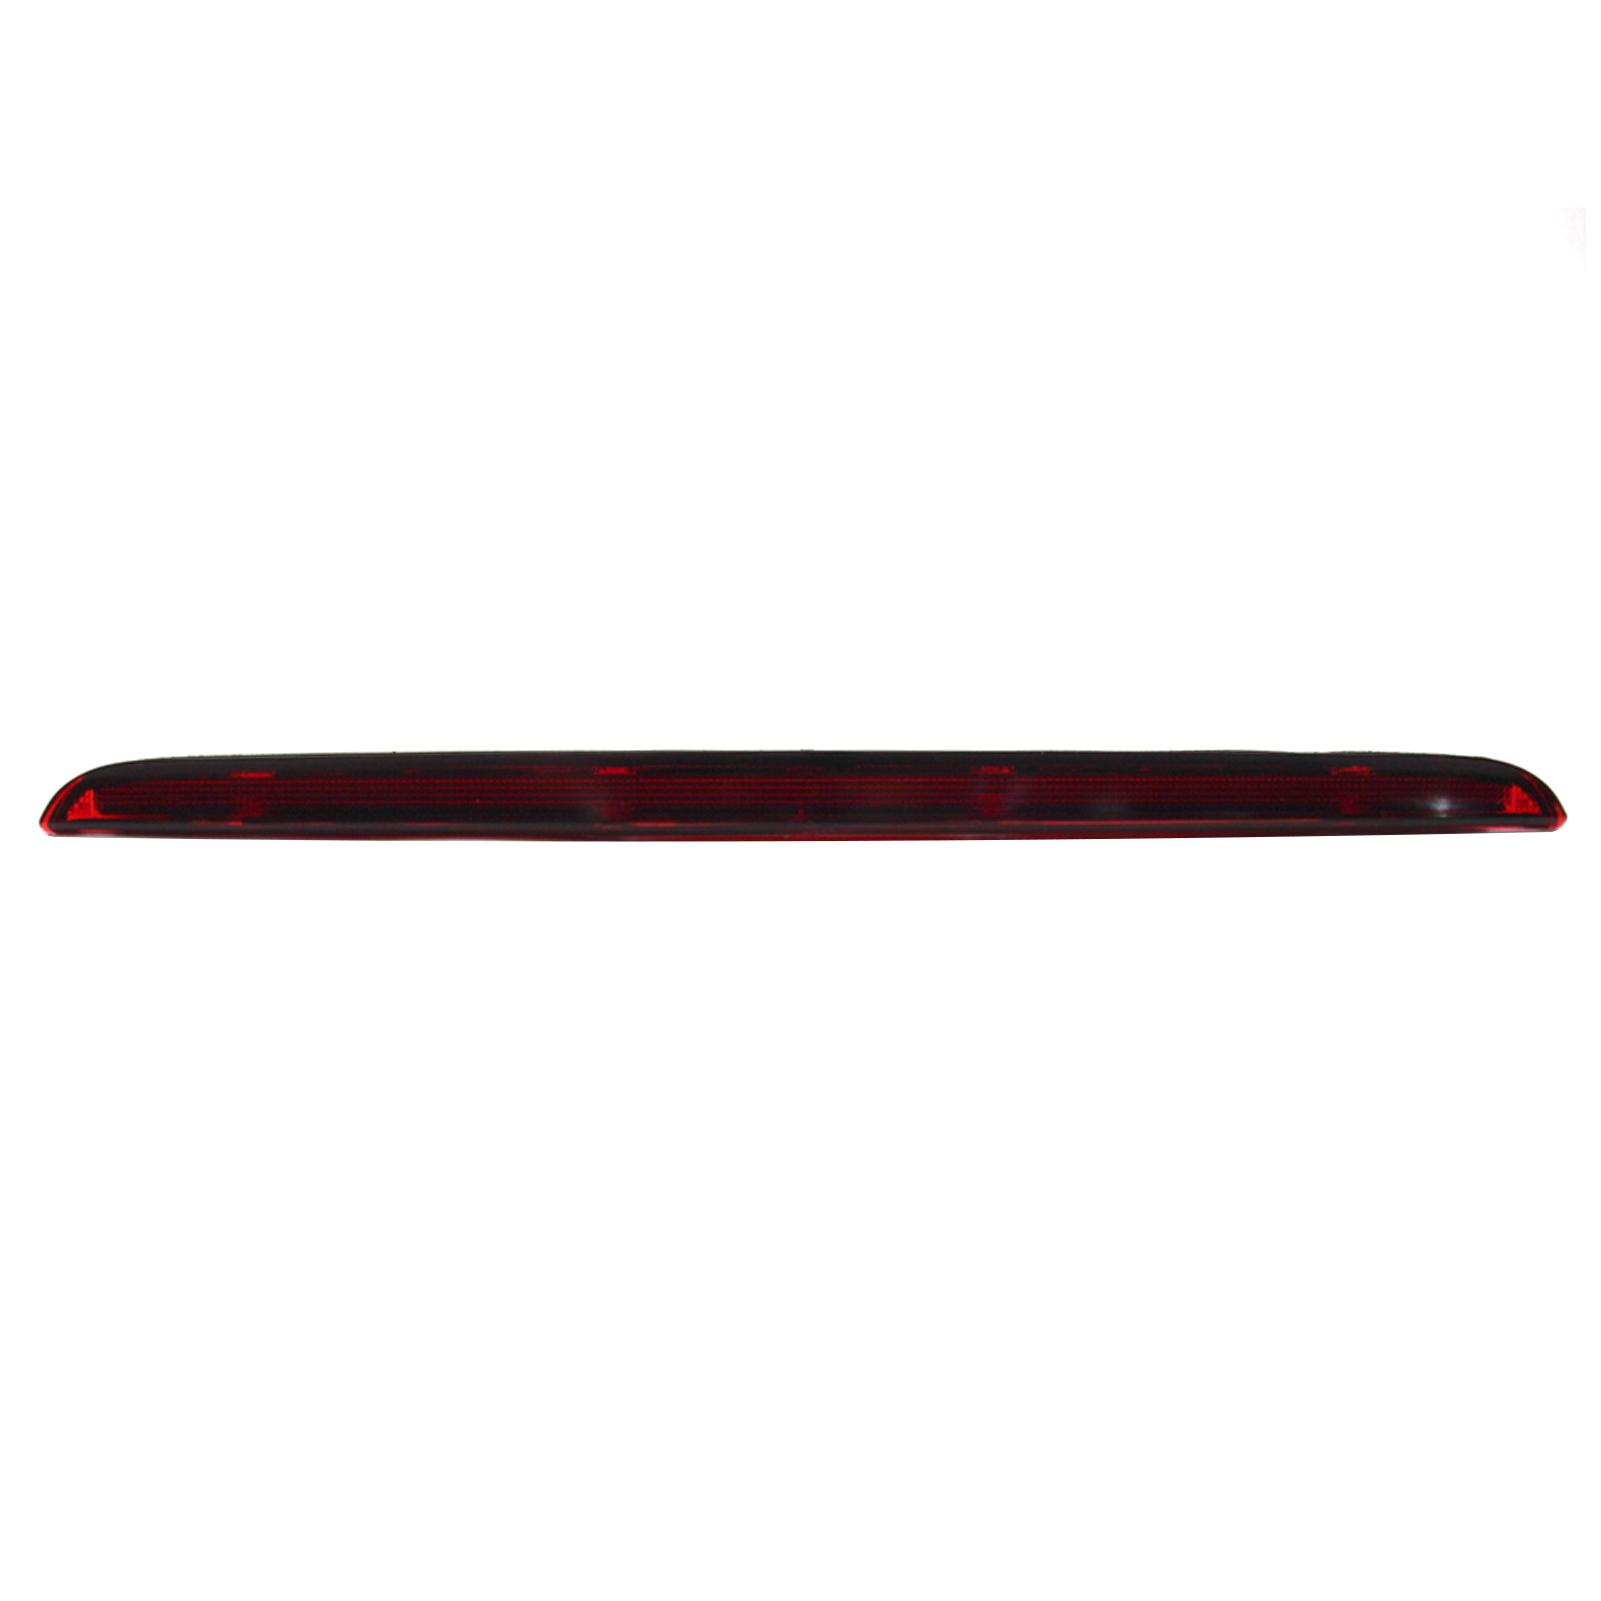 High Mount Brake Light Red 4F9945097 Replacement for Audi A6 AVANT S6 C6 2005-2011